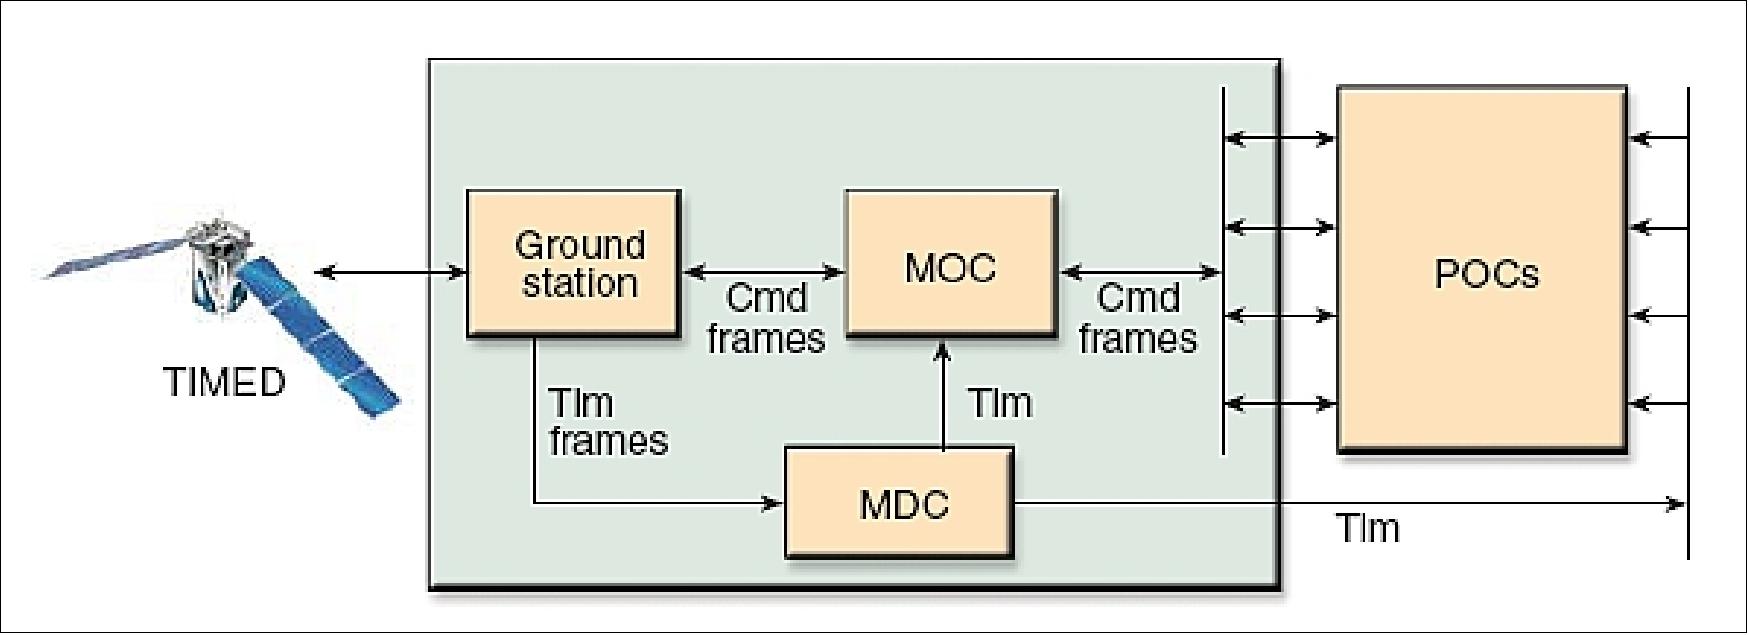 Figure 23: Simplified block diagram of the TIMED ground system (JHU/APL)